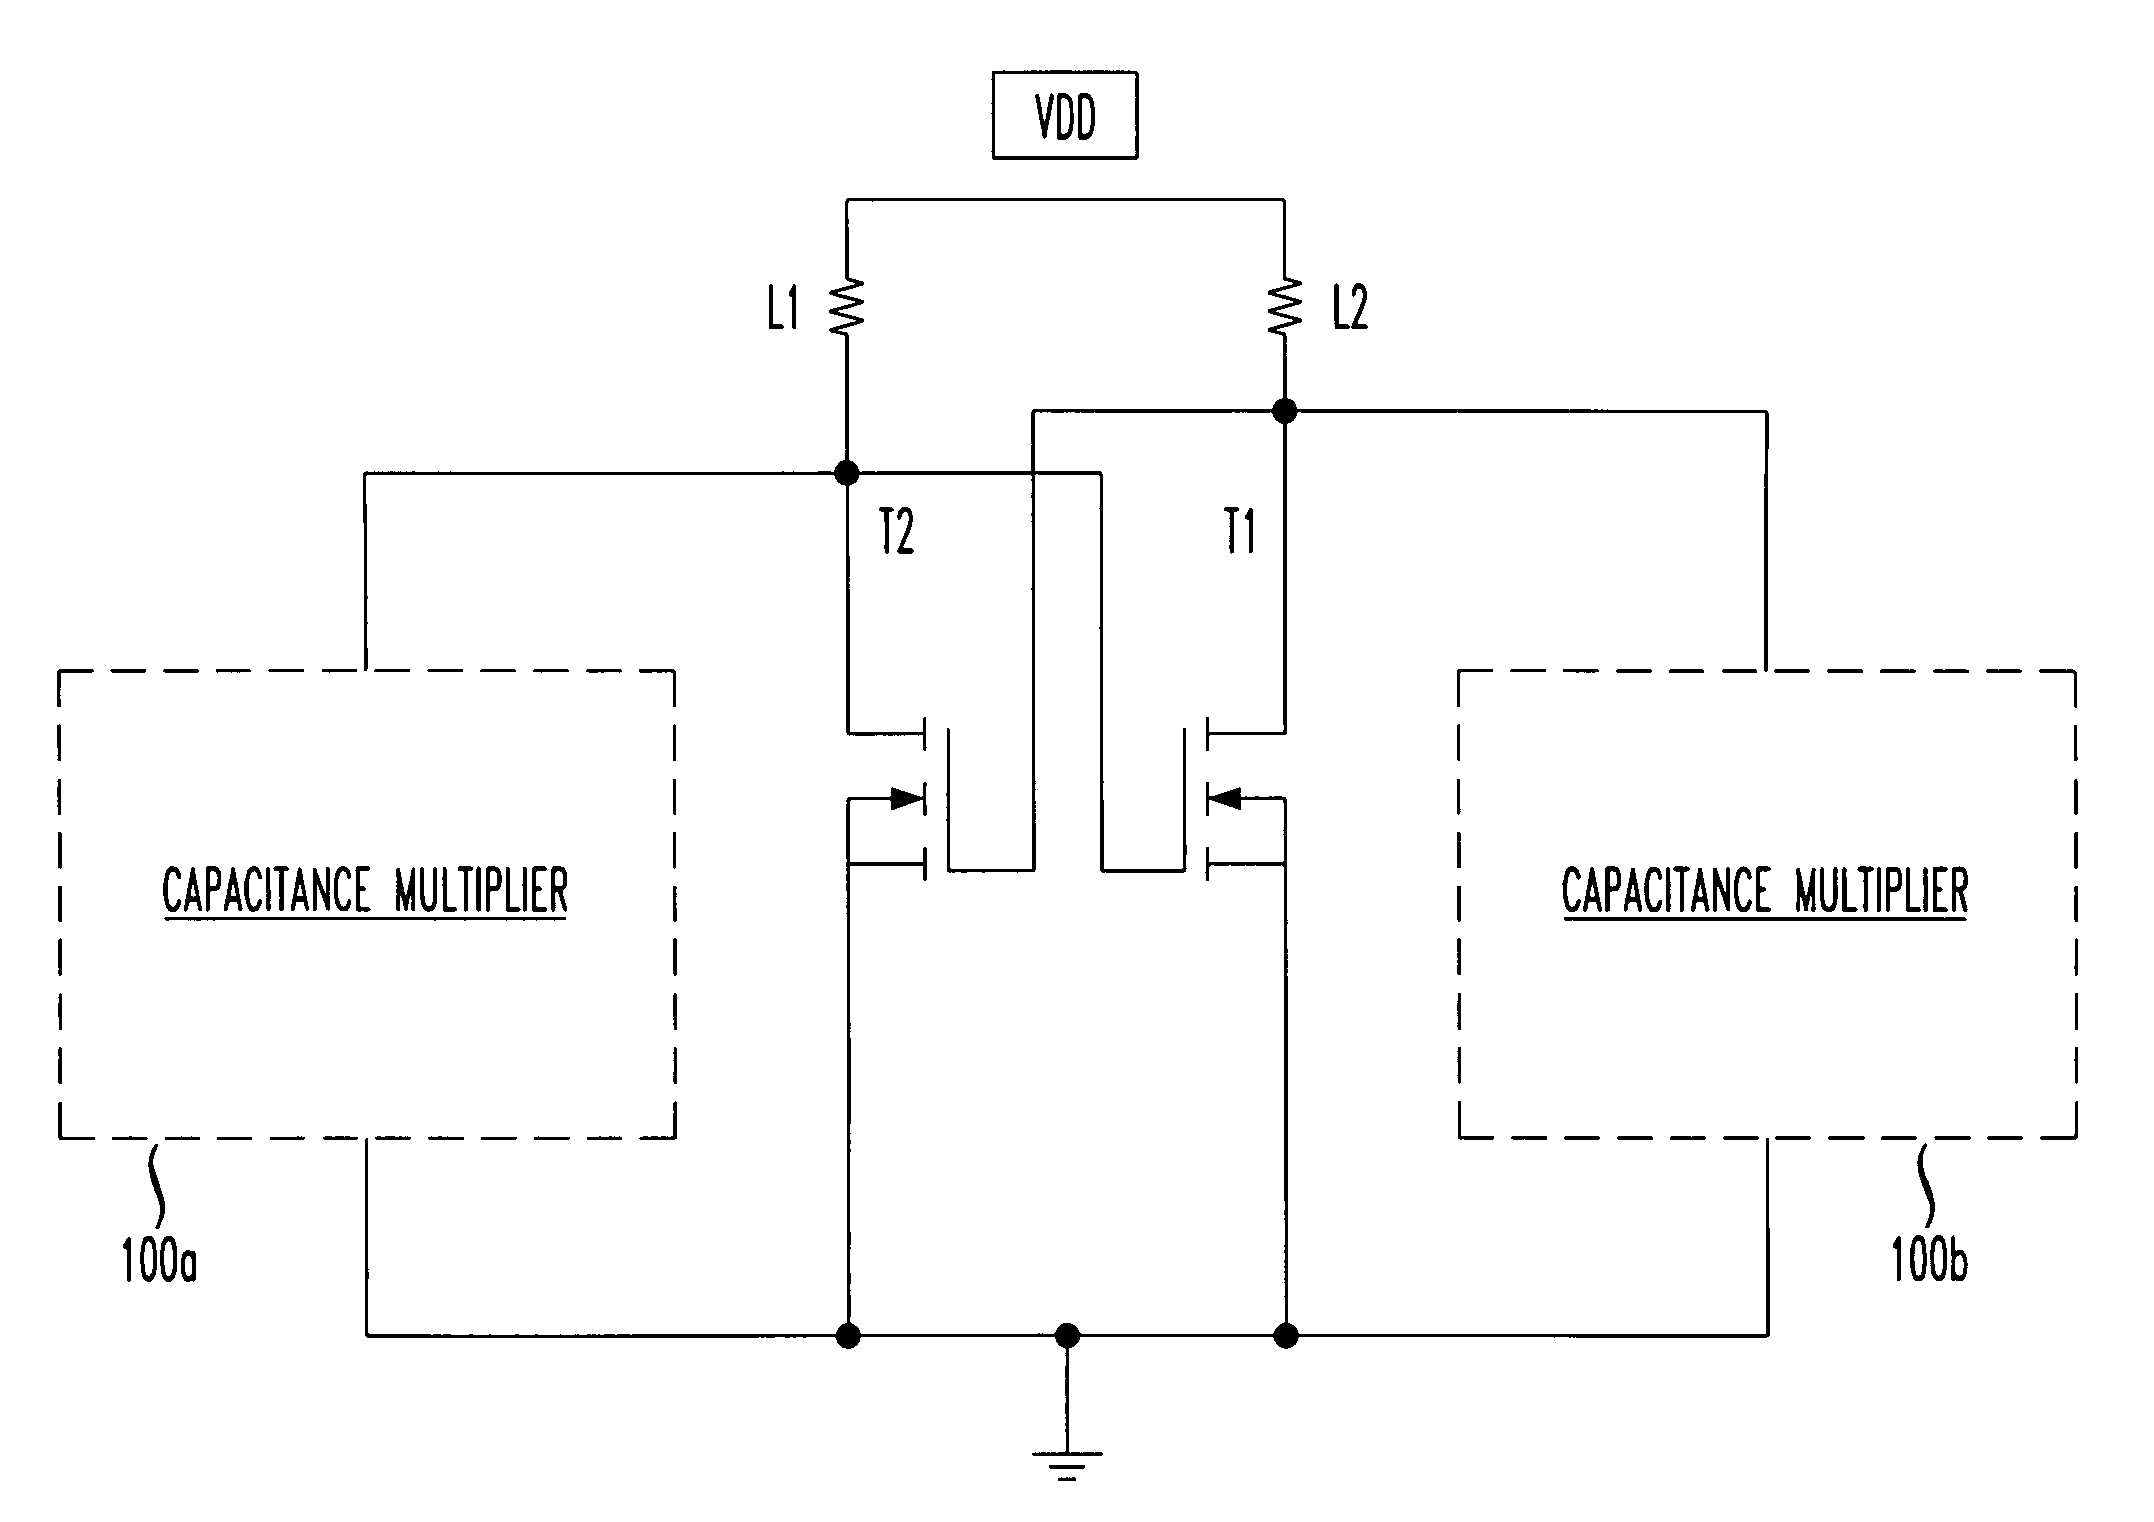 Frequency selection using capacitance multiplication